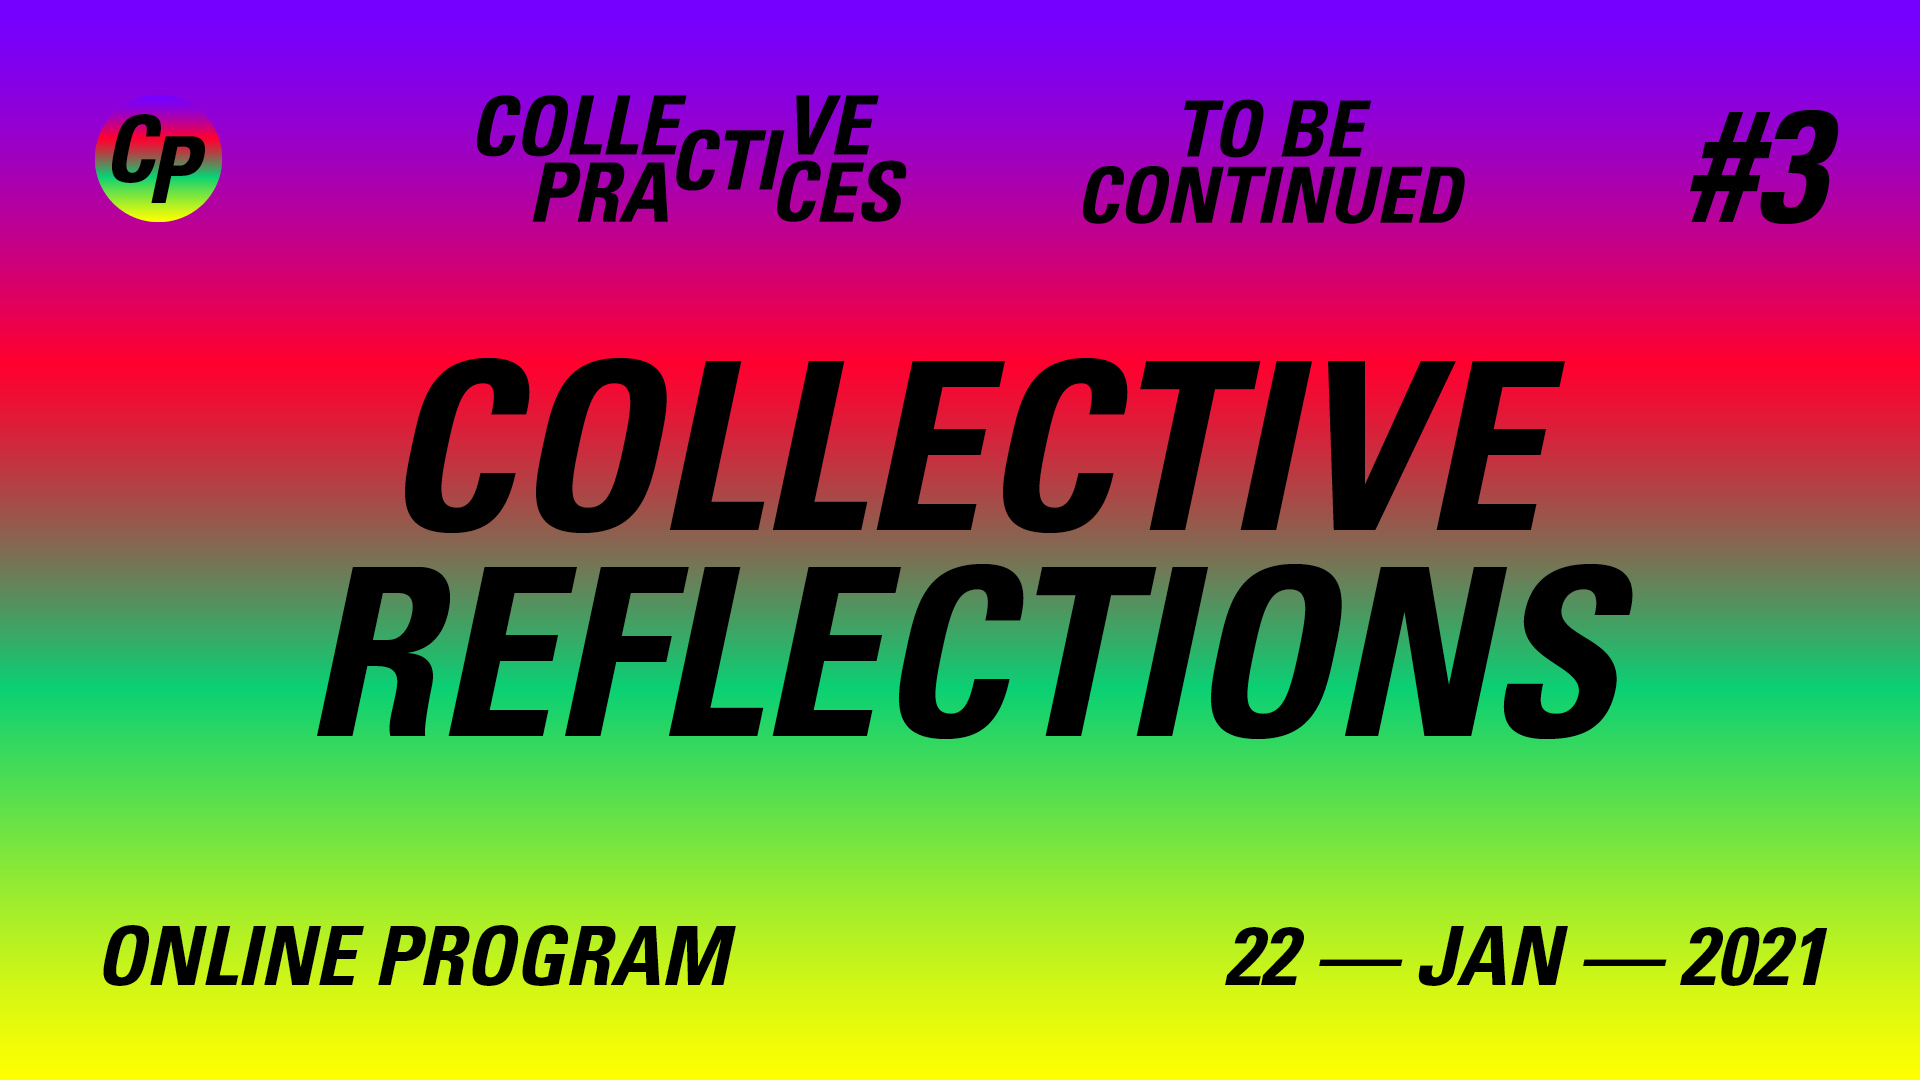 COLLECTIVE REFLECTIONS – Day #3